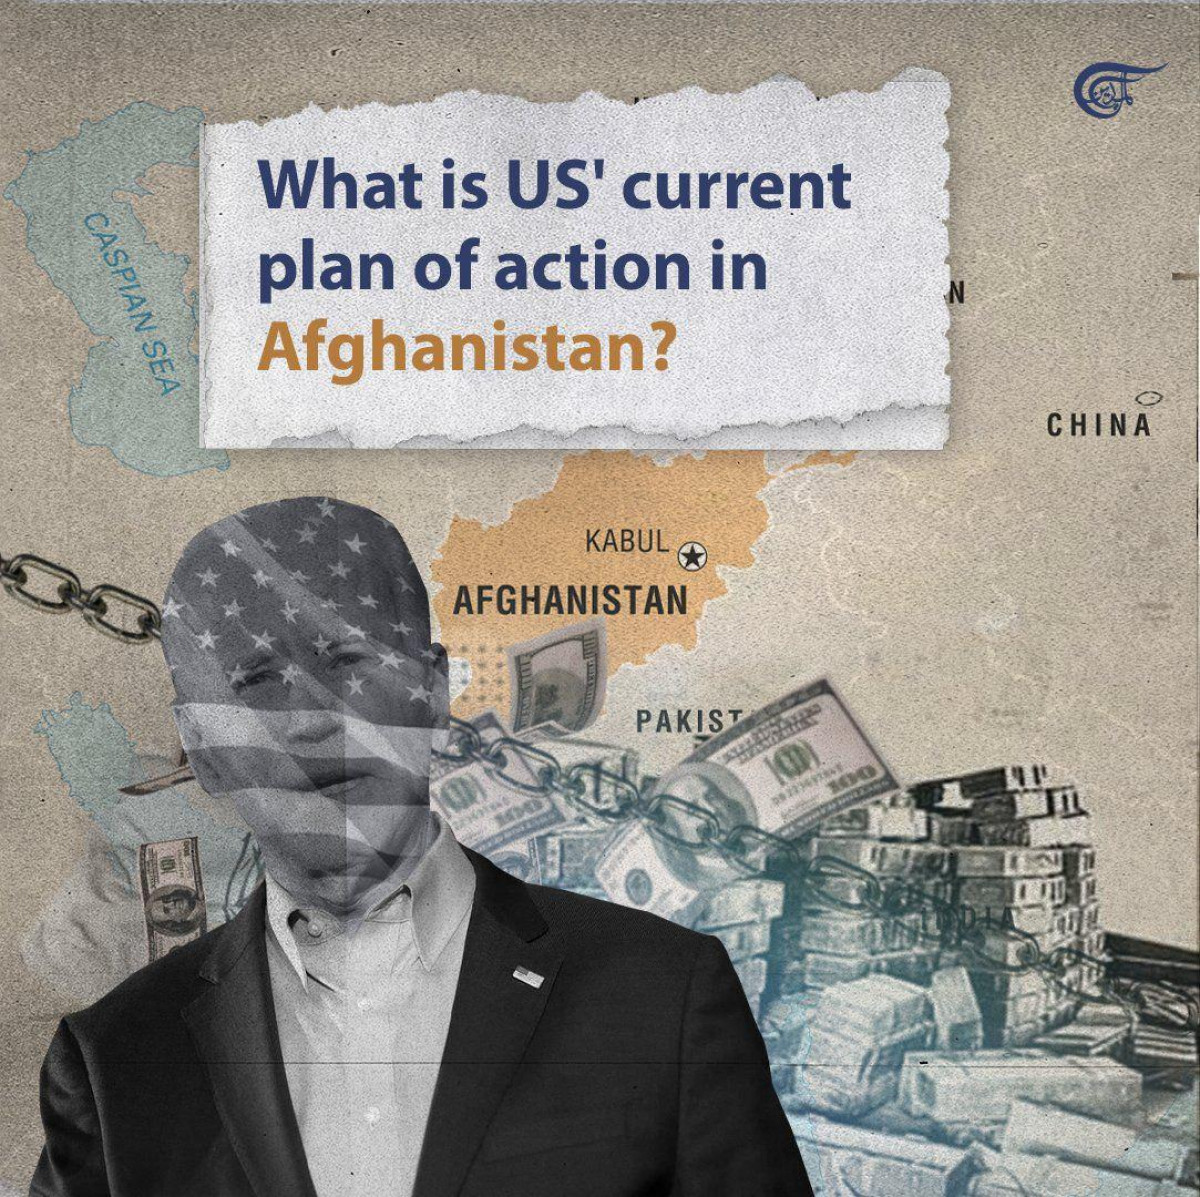 What is US' current plan of action in Afghanistan?